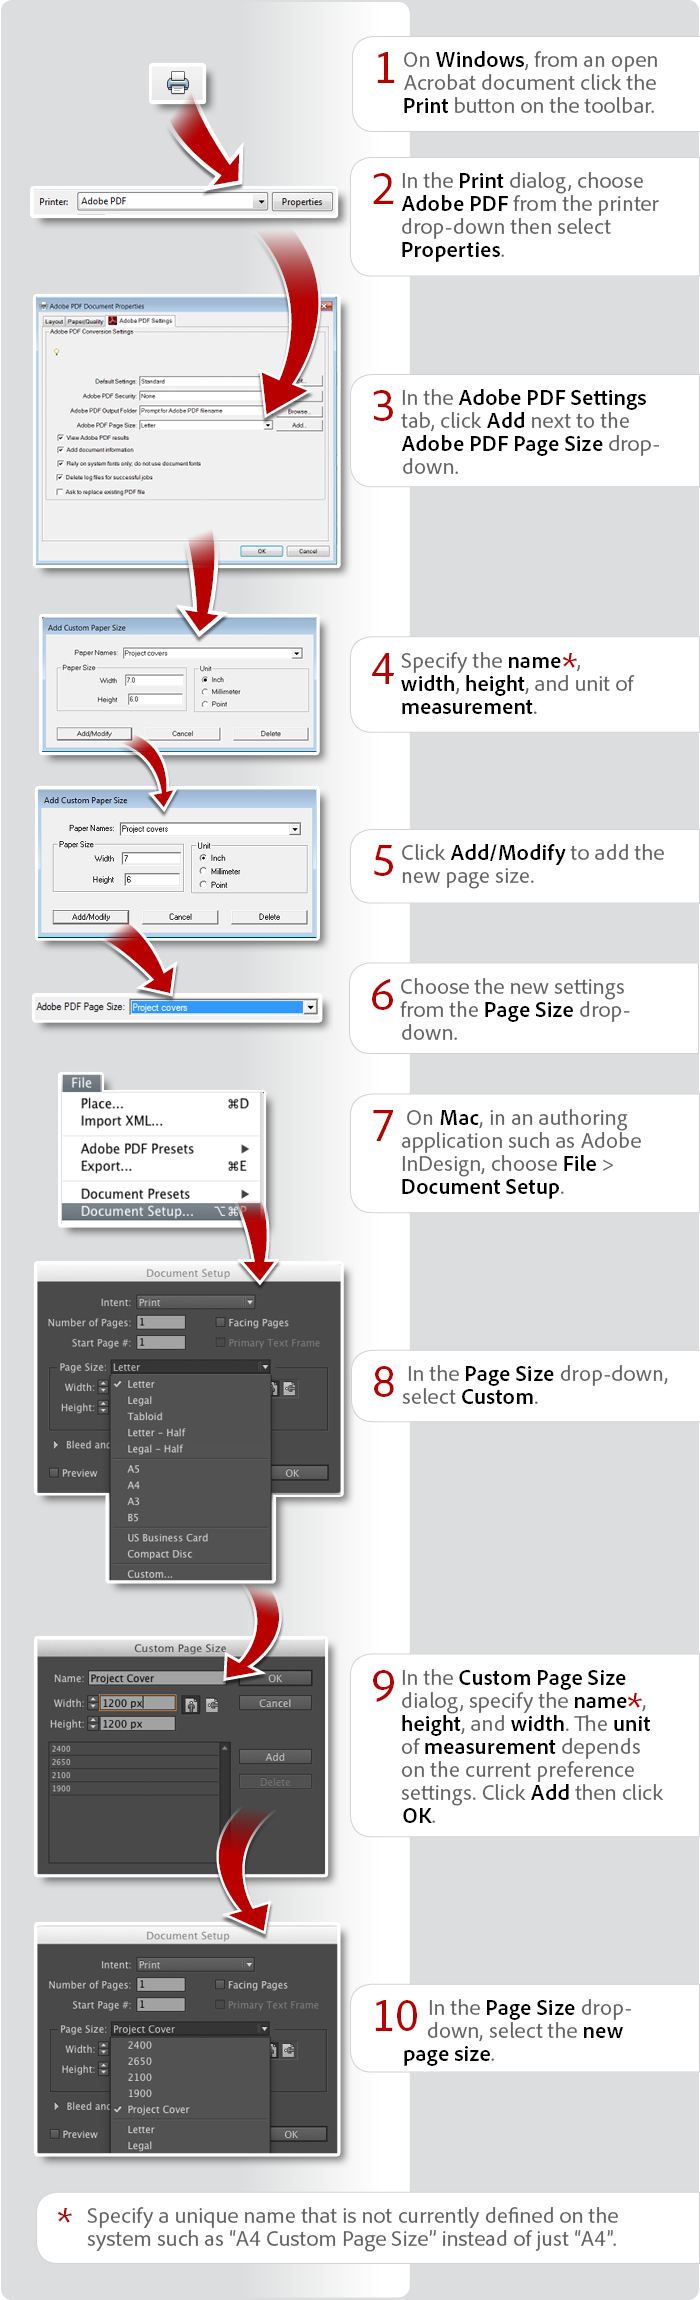 How to create a custom page size using Acrobat XI